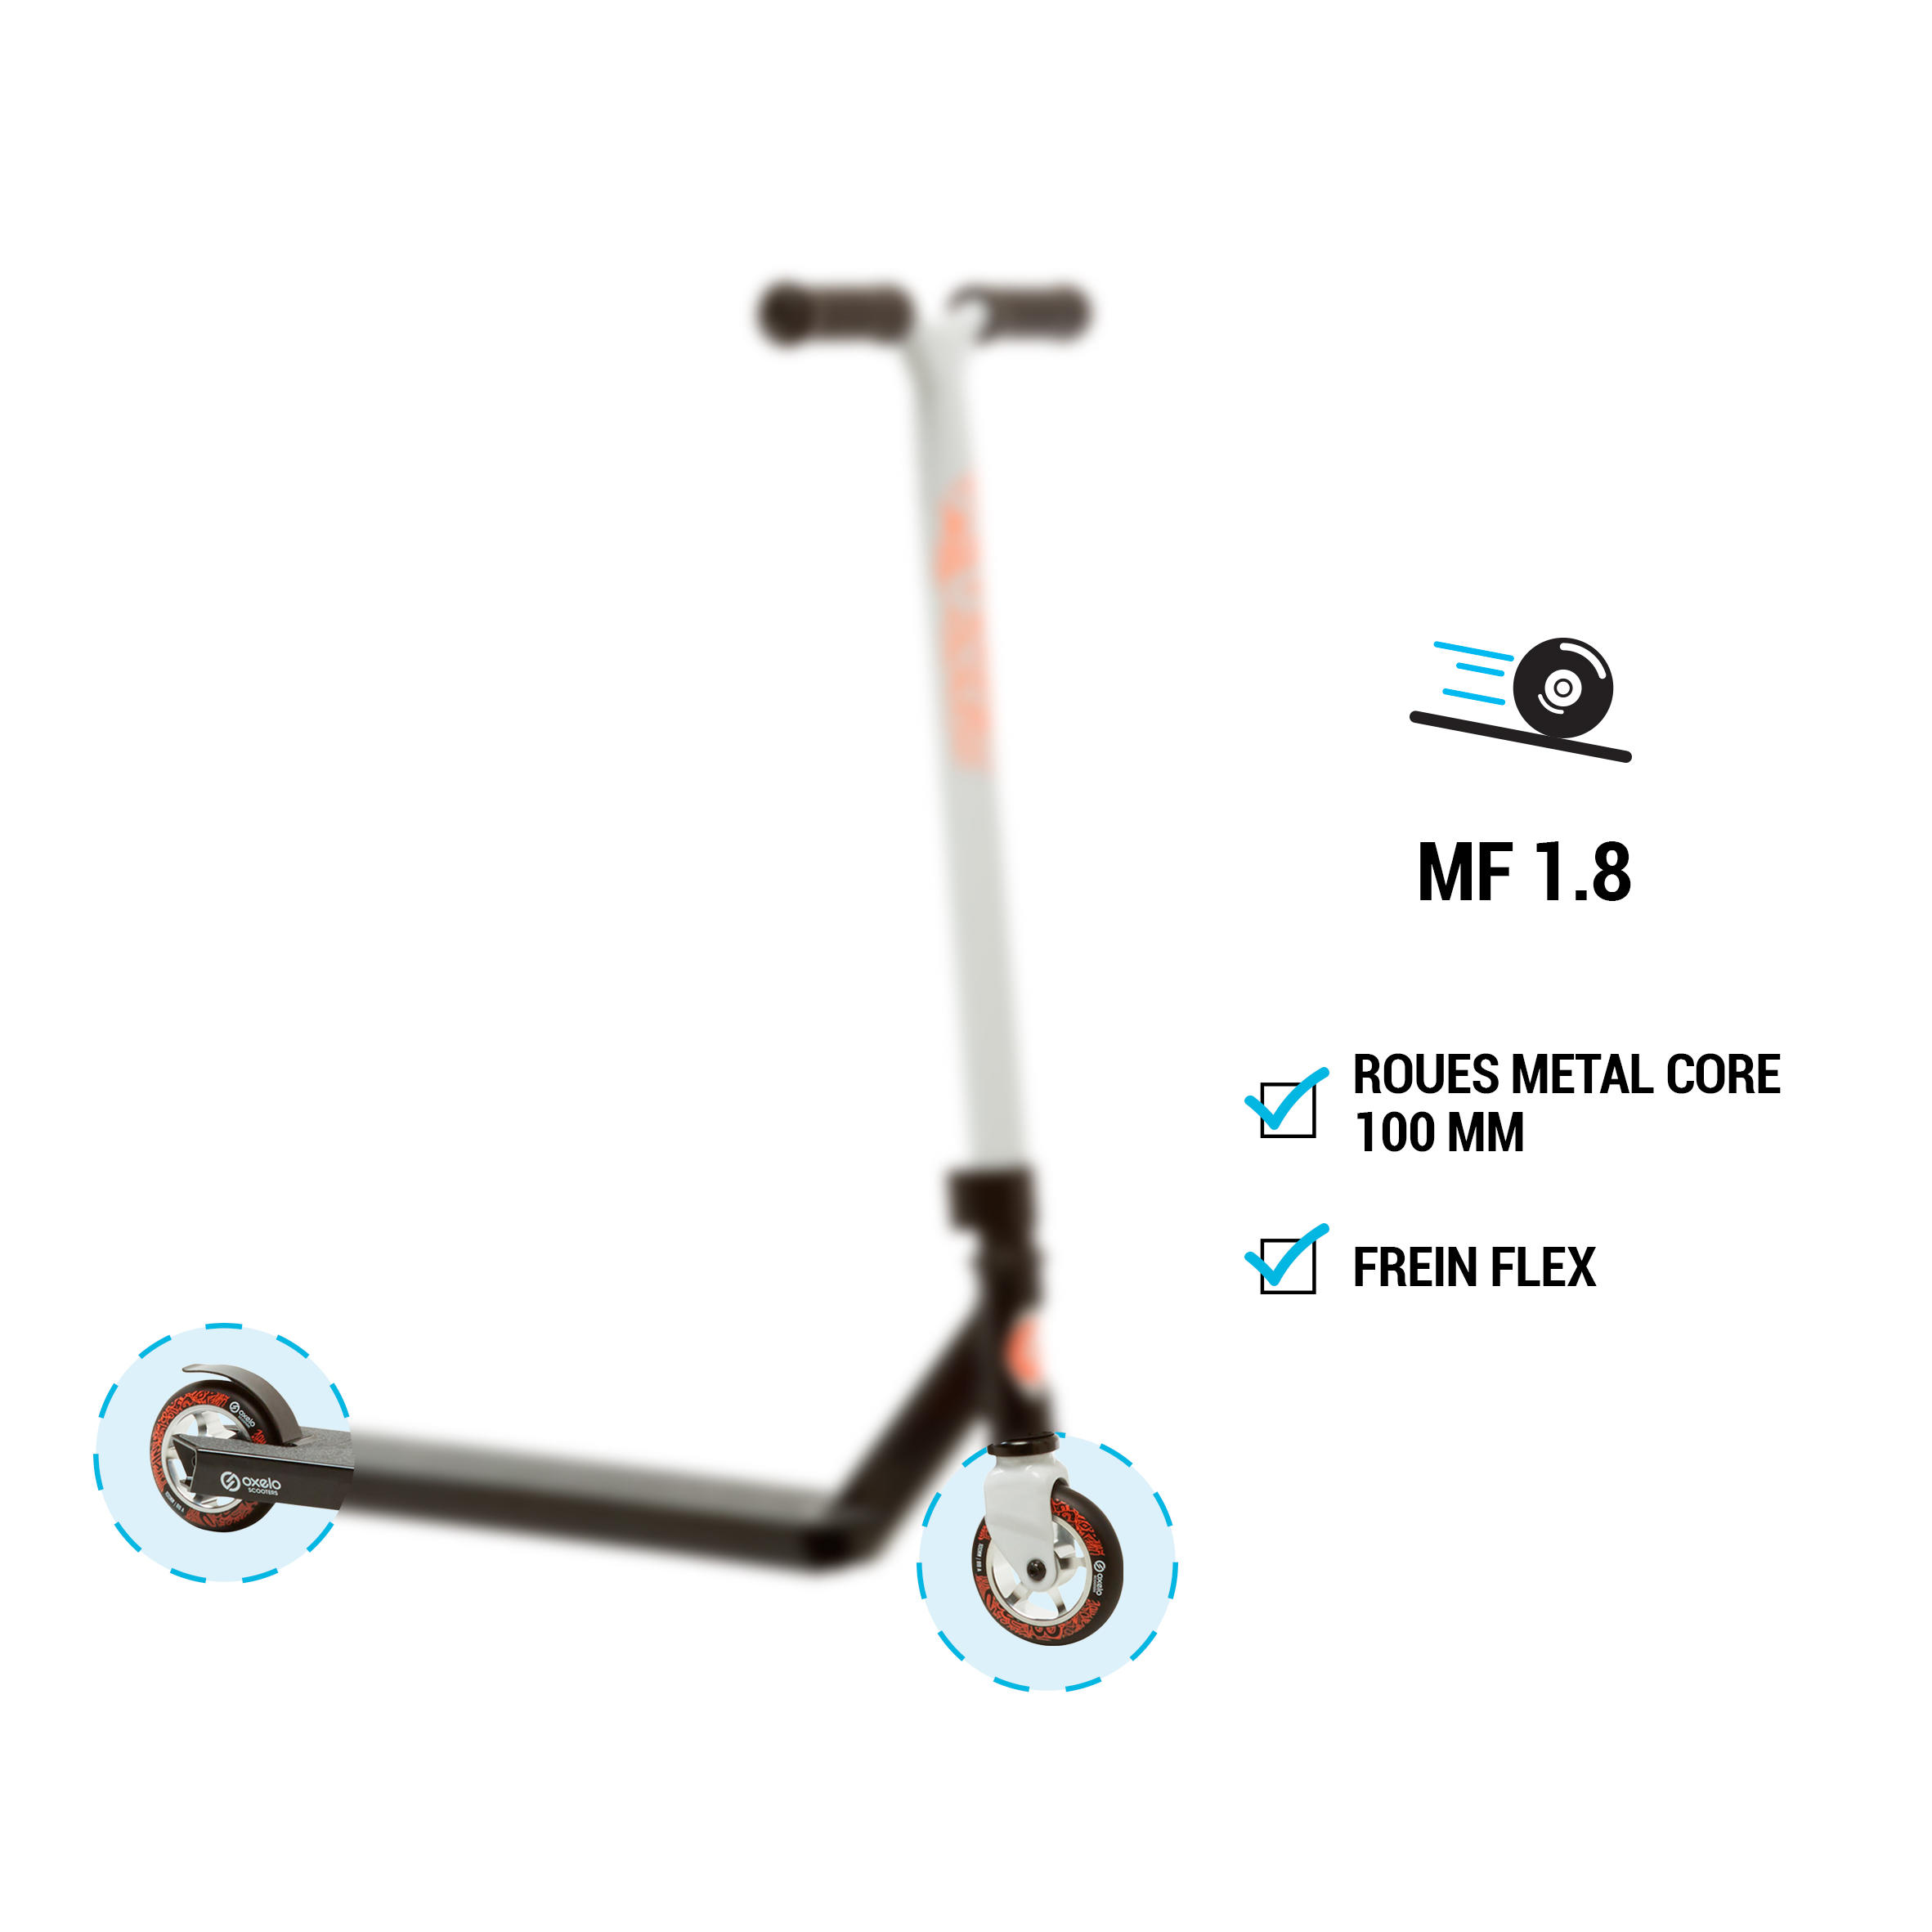 decathlon freestyle scooter